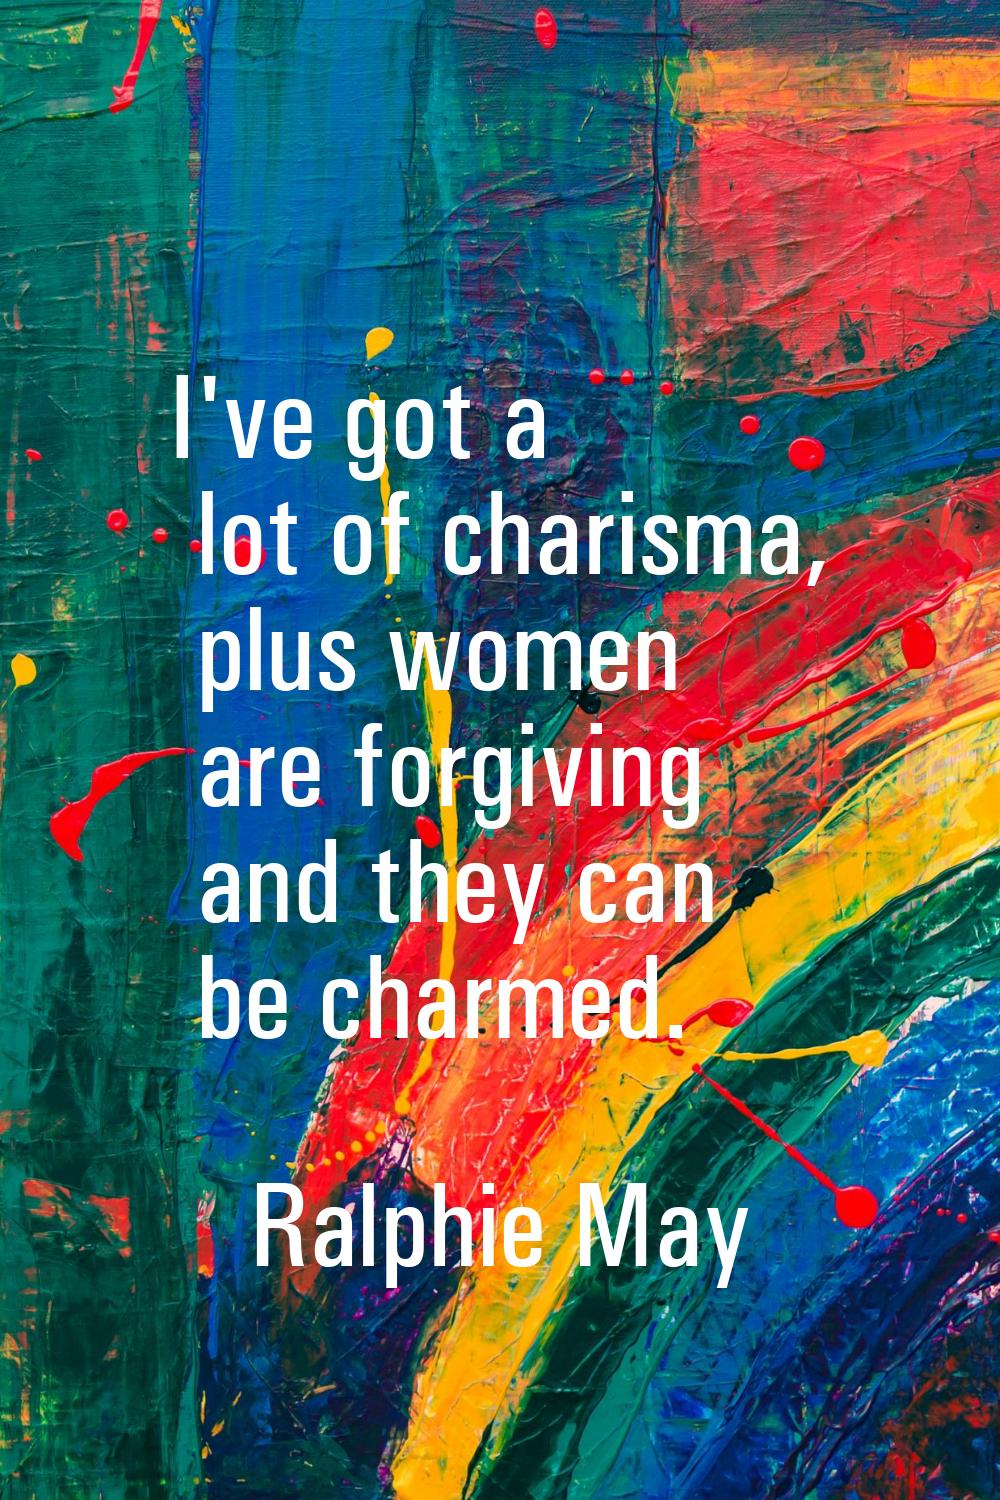 I've got a lot of charisma, plus women are forgiving and they can be charmed.